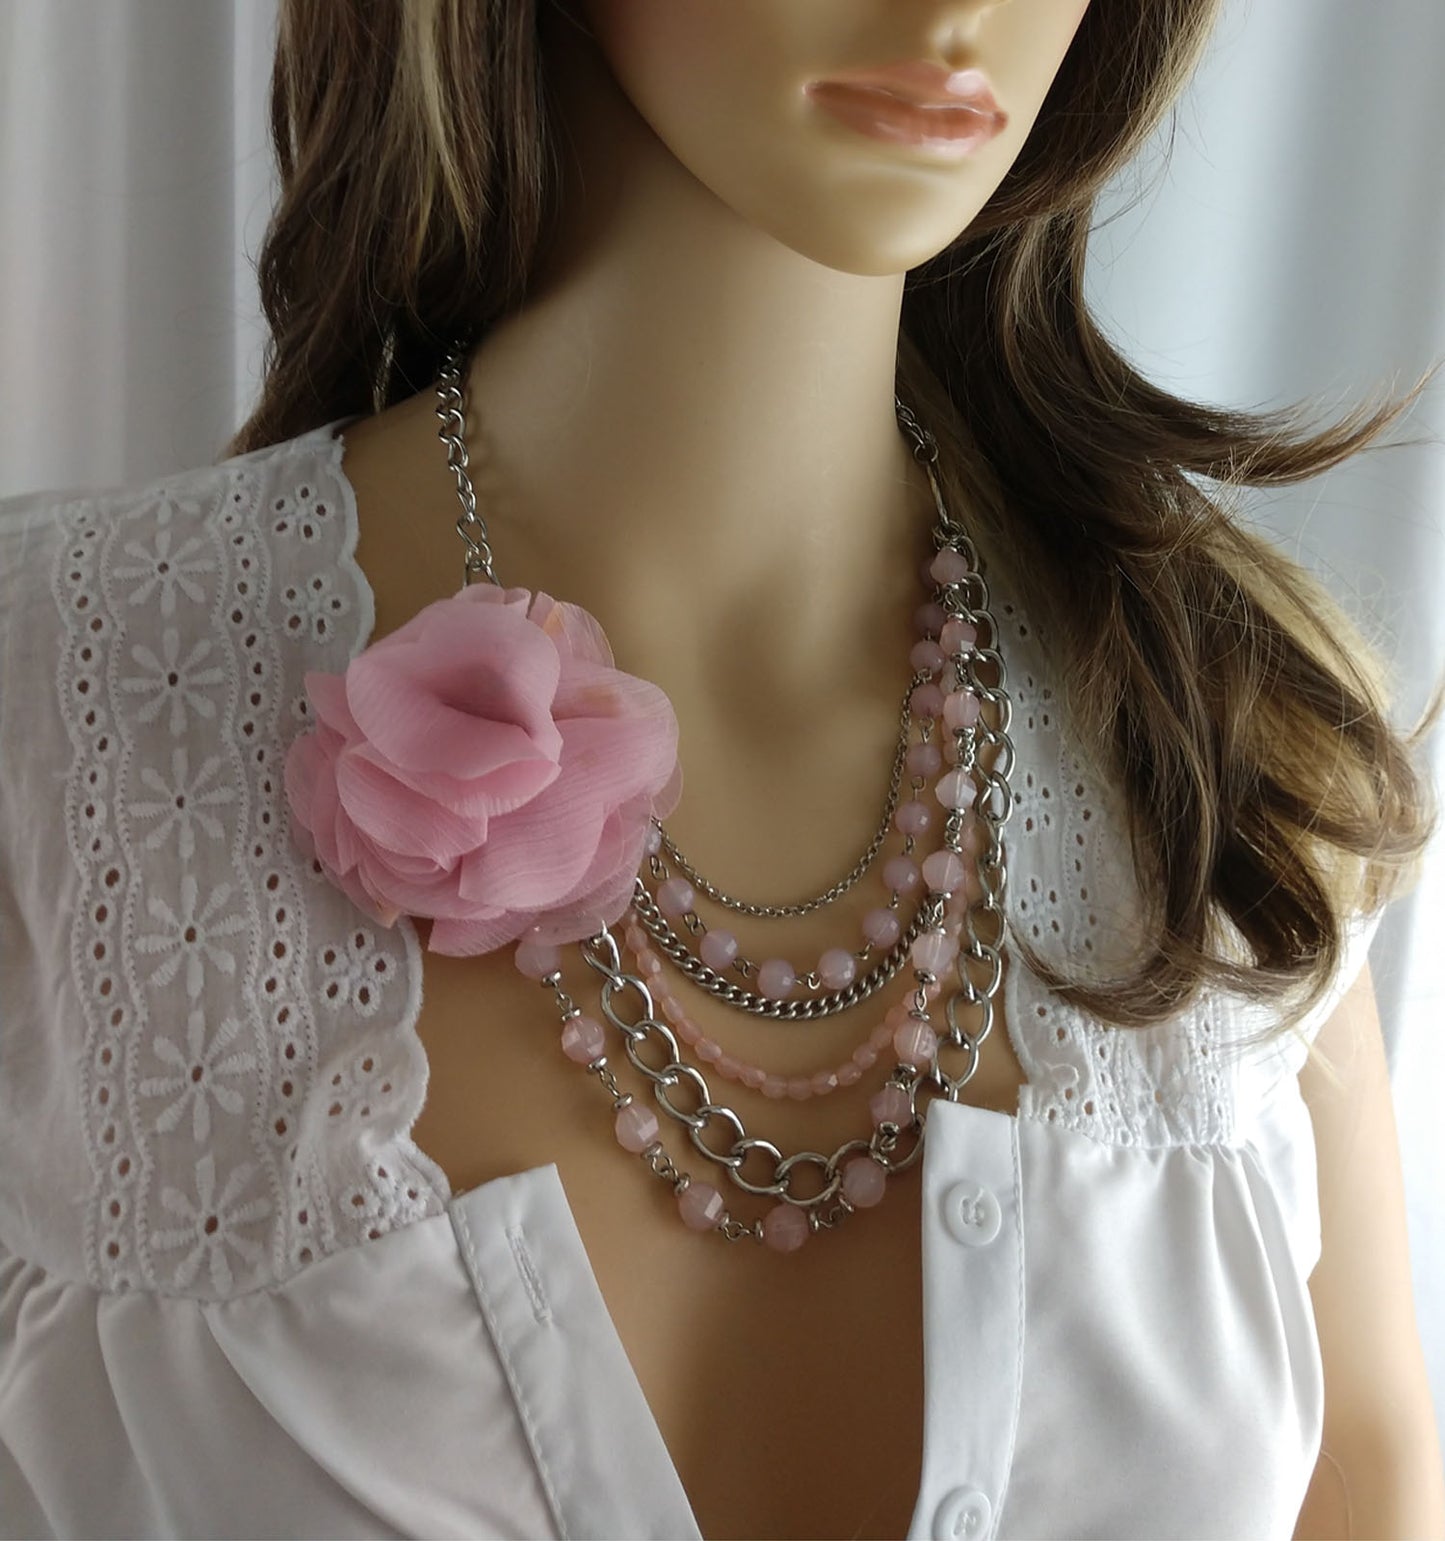 Flower Statement Necklace Beaded Necklace Light Pink Faceted Layered Chains 23"